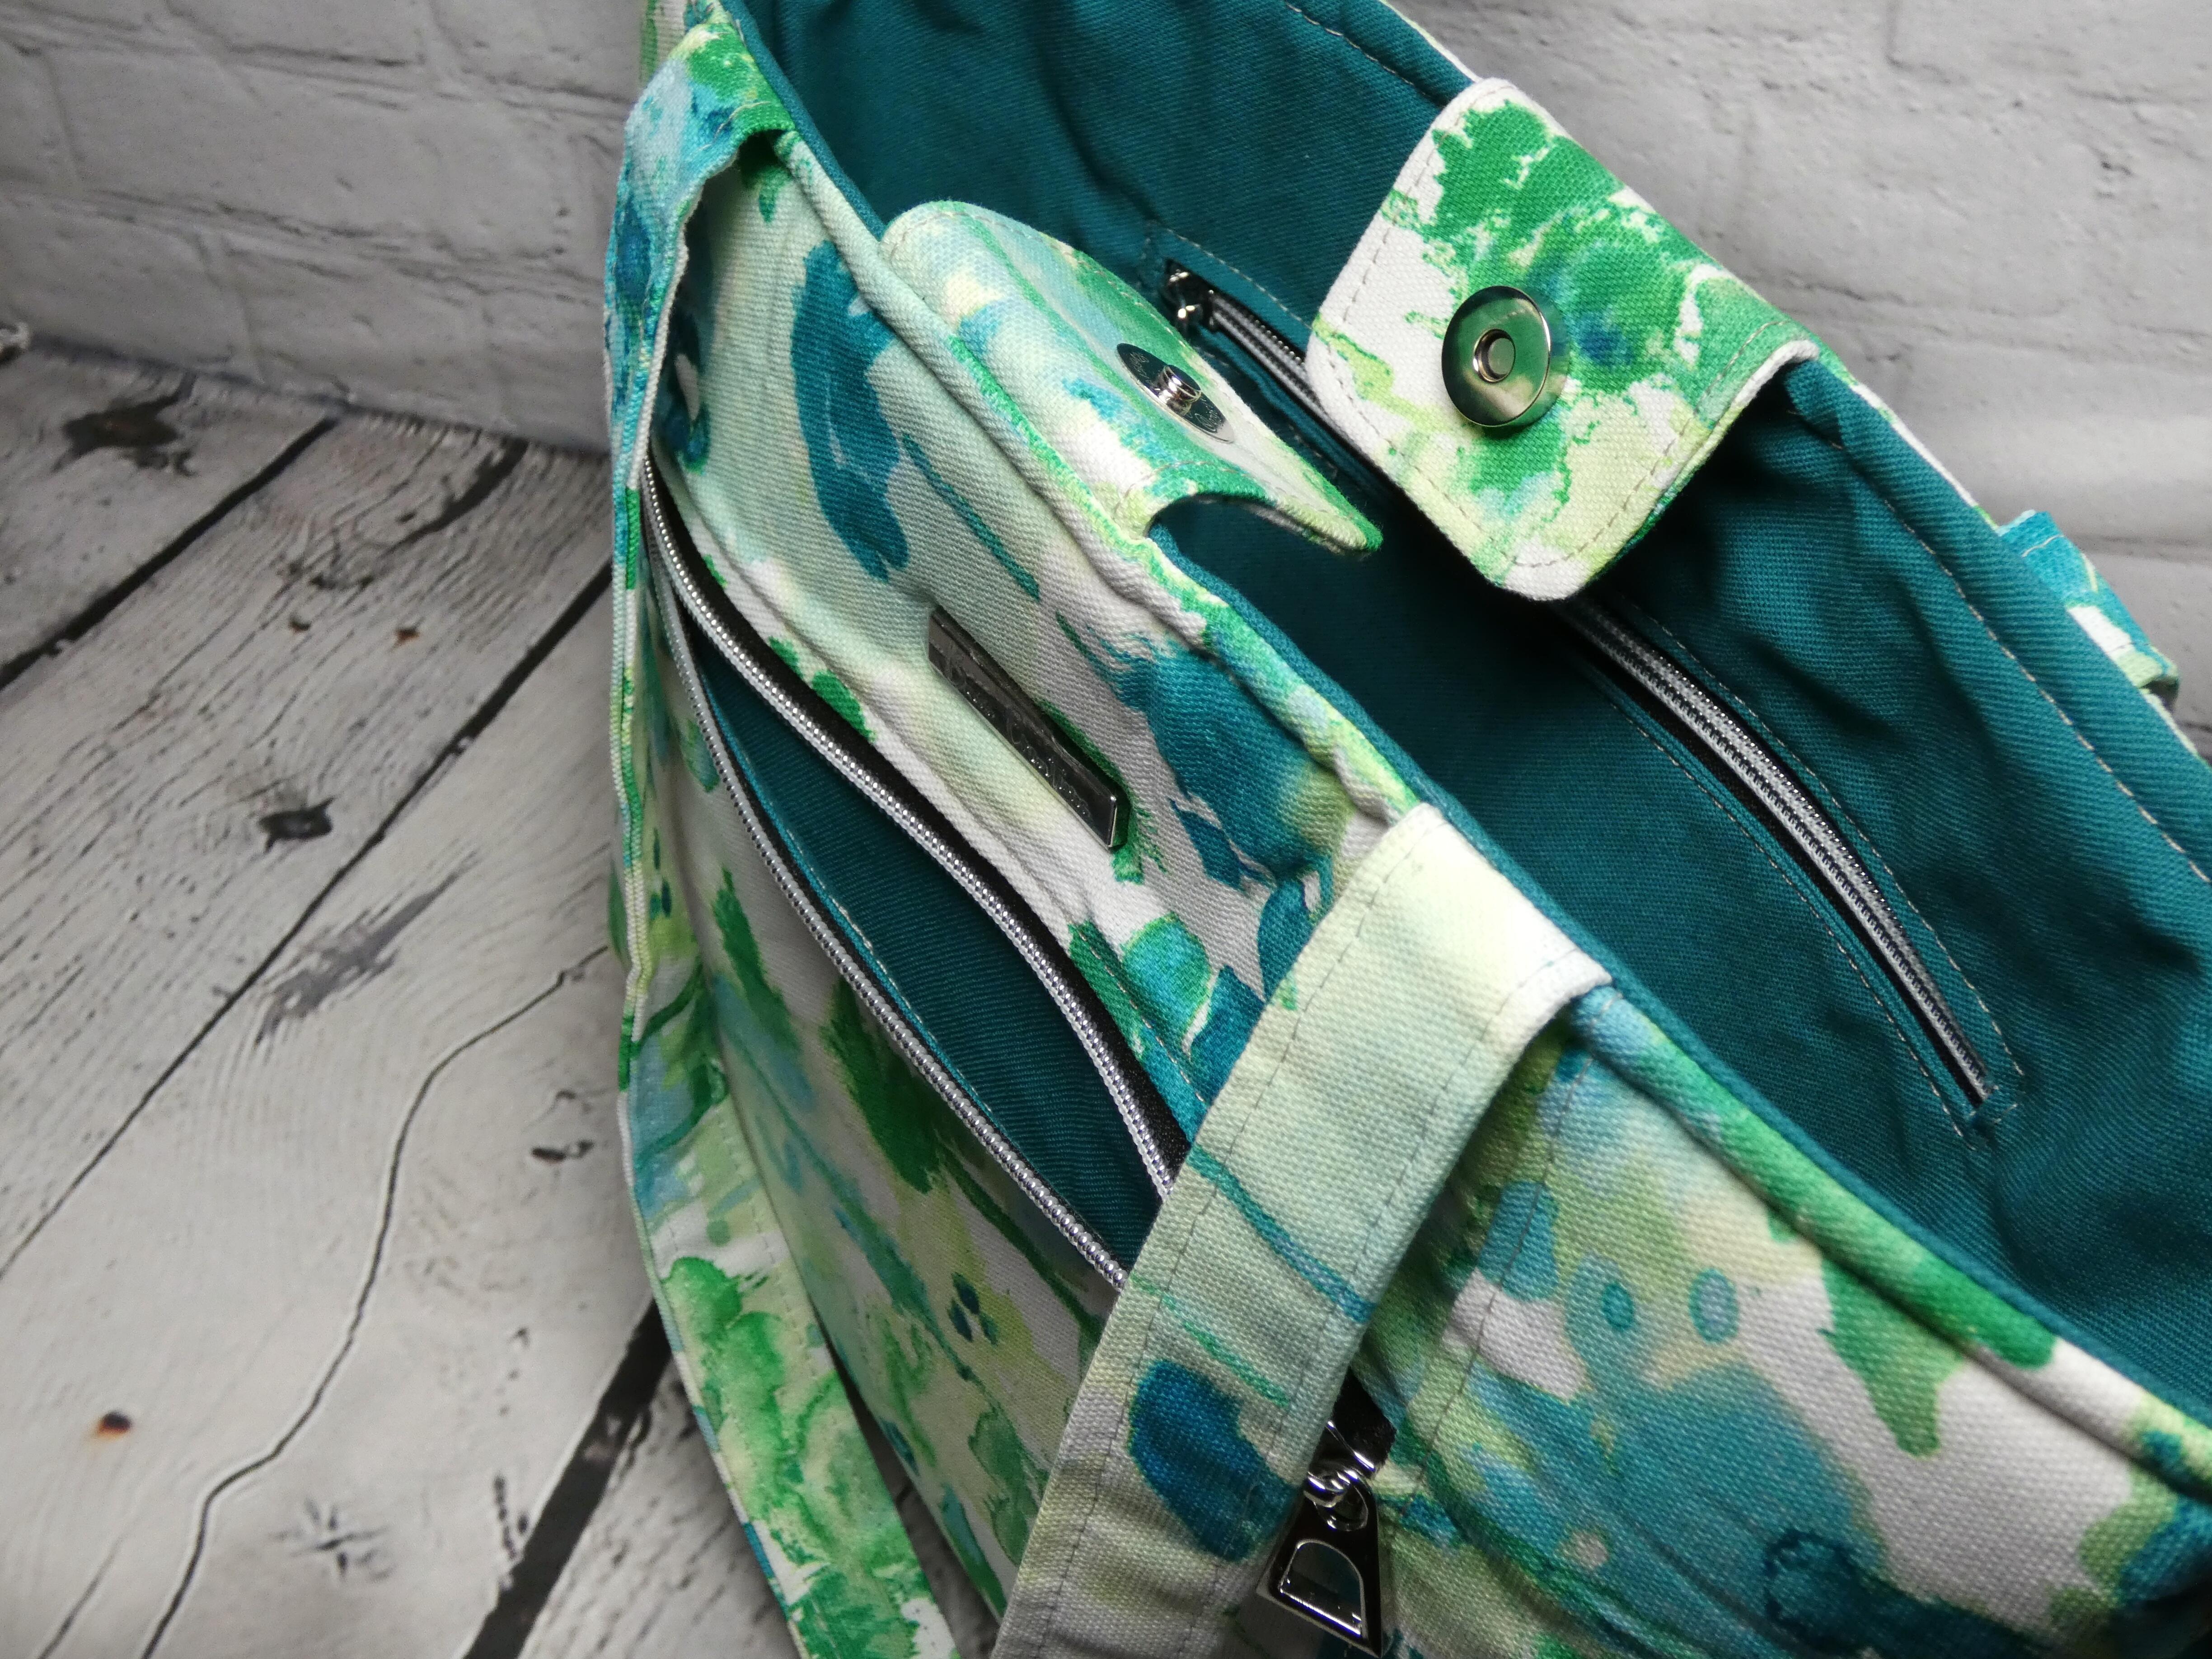 Top view of a market tote featuring the magnetic closure, green splotches outer fabric, and teal lining fabric.